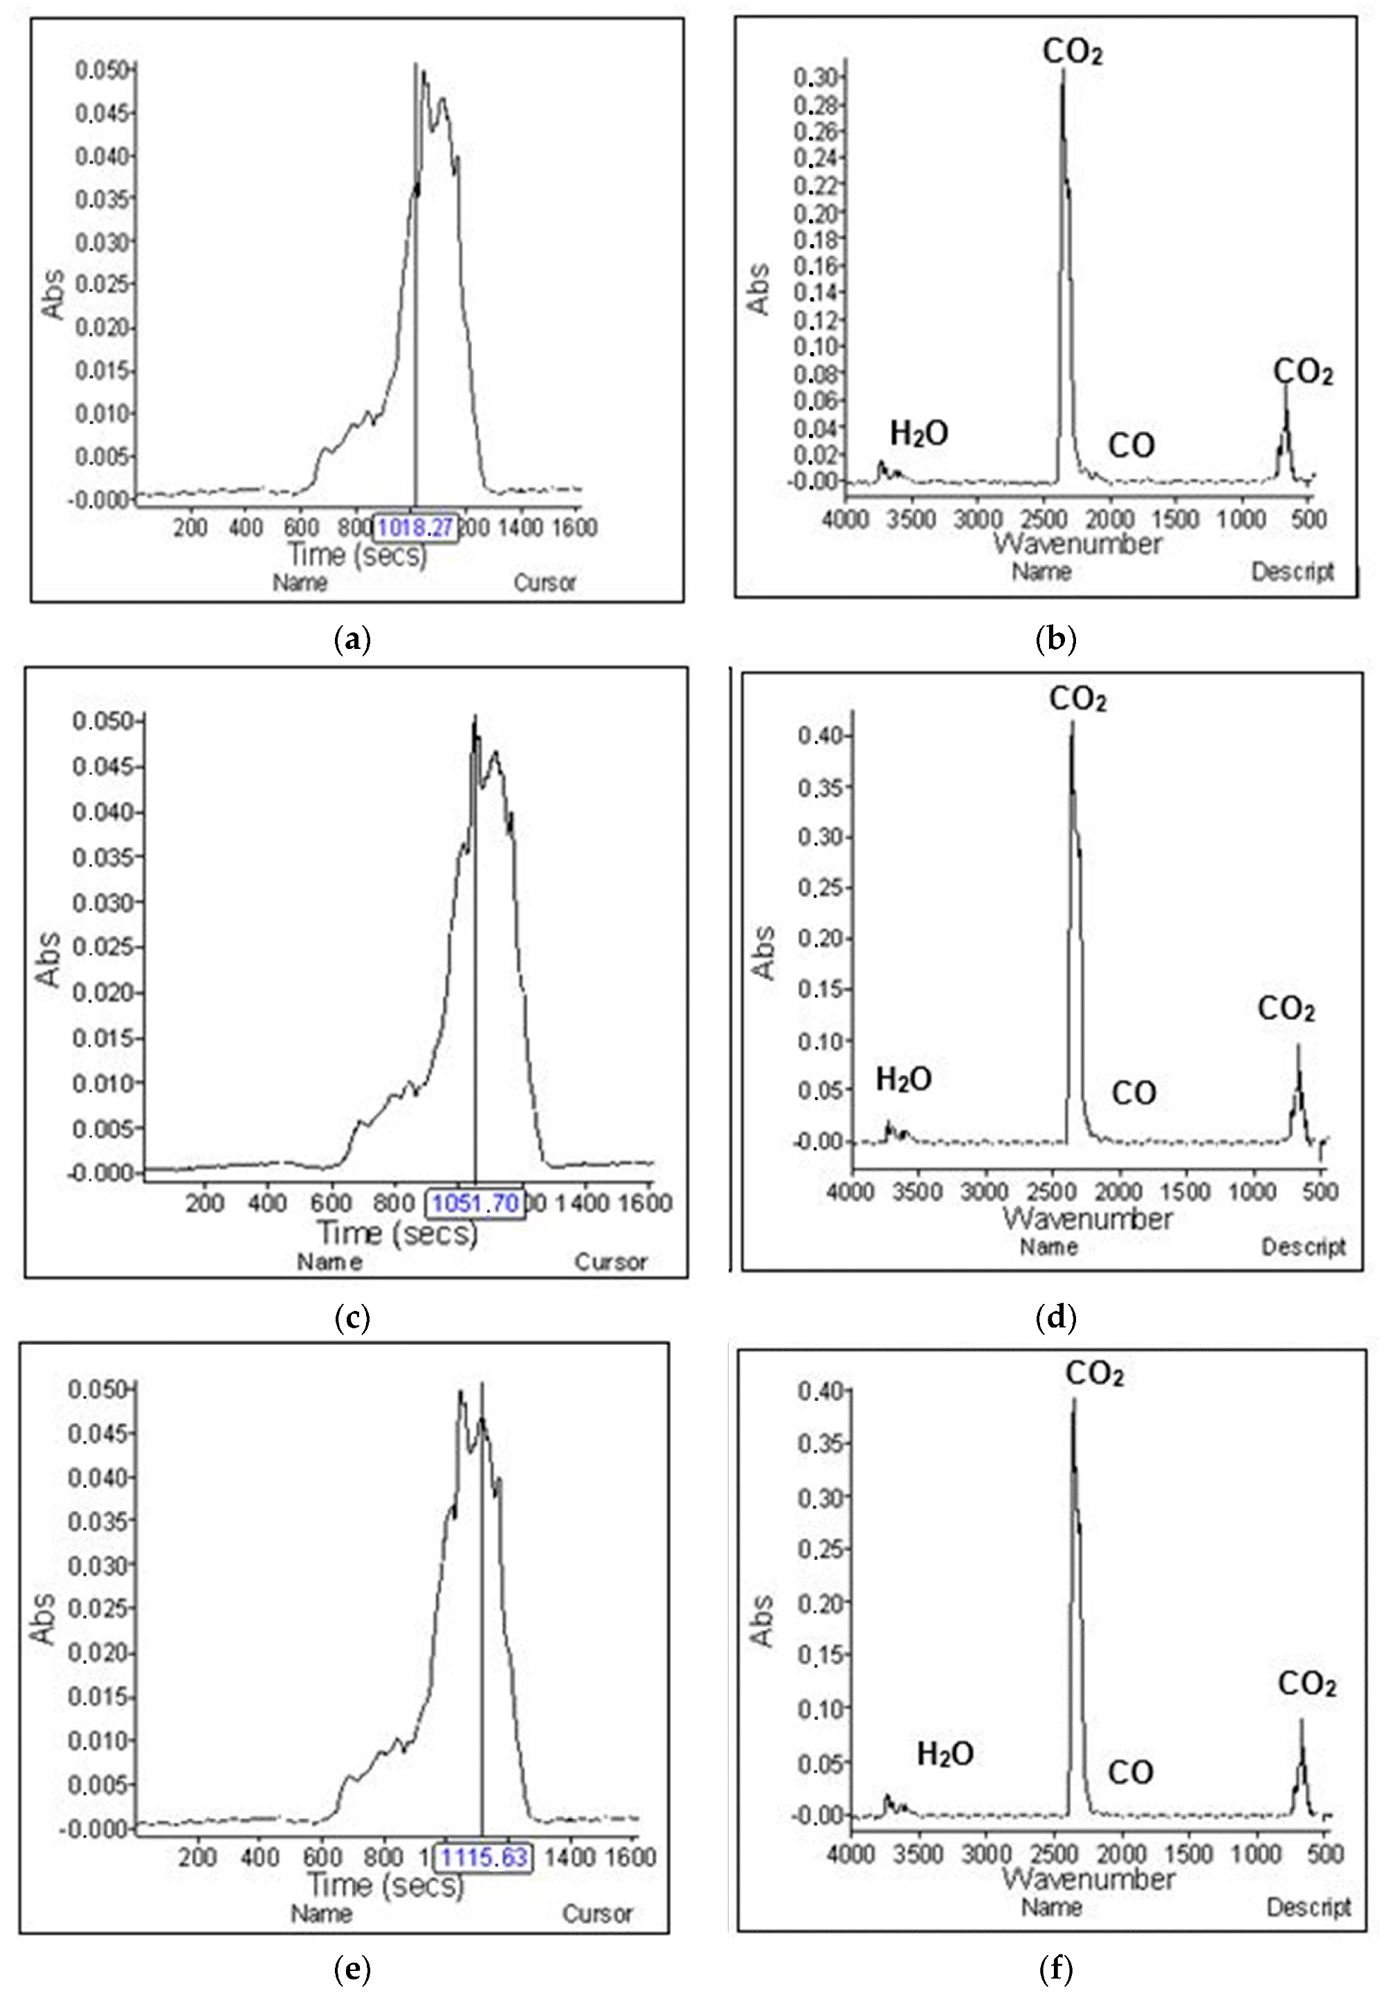 TG-IR analysis of sample. (a) The first intense absorption spectrum; (b) measured gases on IR at a temperature of 509.13 °C: (c) second absorption spectrum; (d) measured gases on IR at a temperature of 525.85 °C; (e) third absorption spectrum; (f) measured gases on IR at a temperature of 557.82 °C.